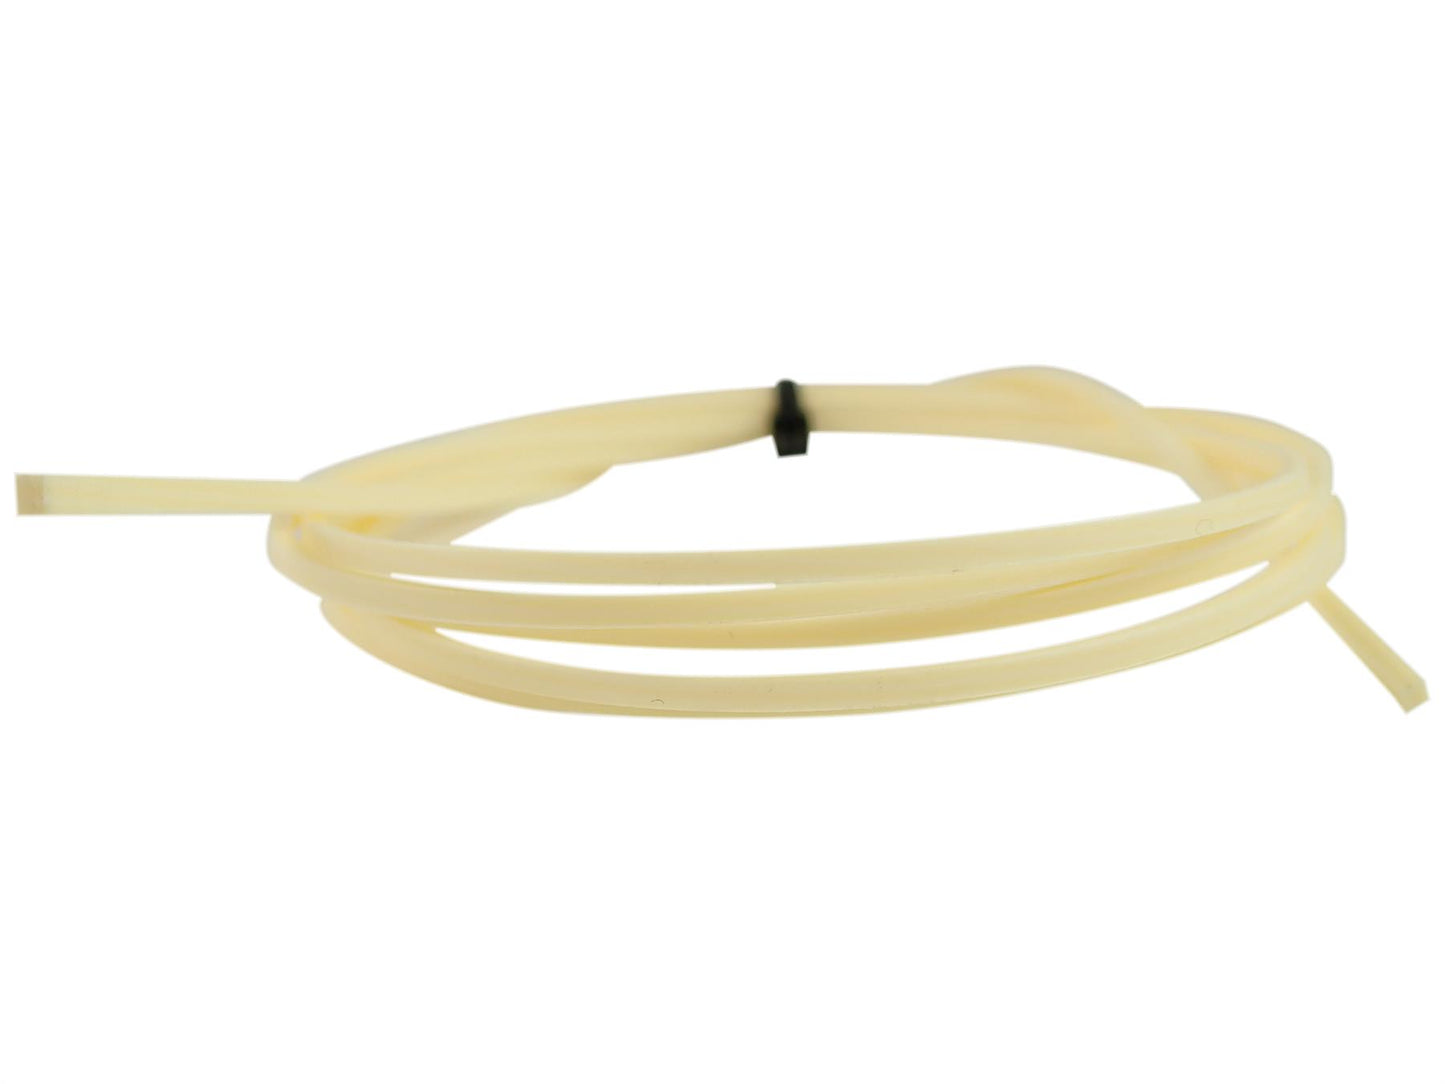 Incudo Solid Straight Grain Ivory Celluloid Guitar Purfling - 1400x2x1.5mm (55.1x0.08x0.06")